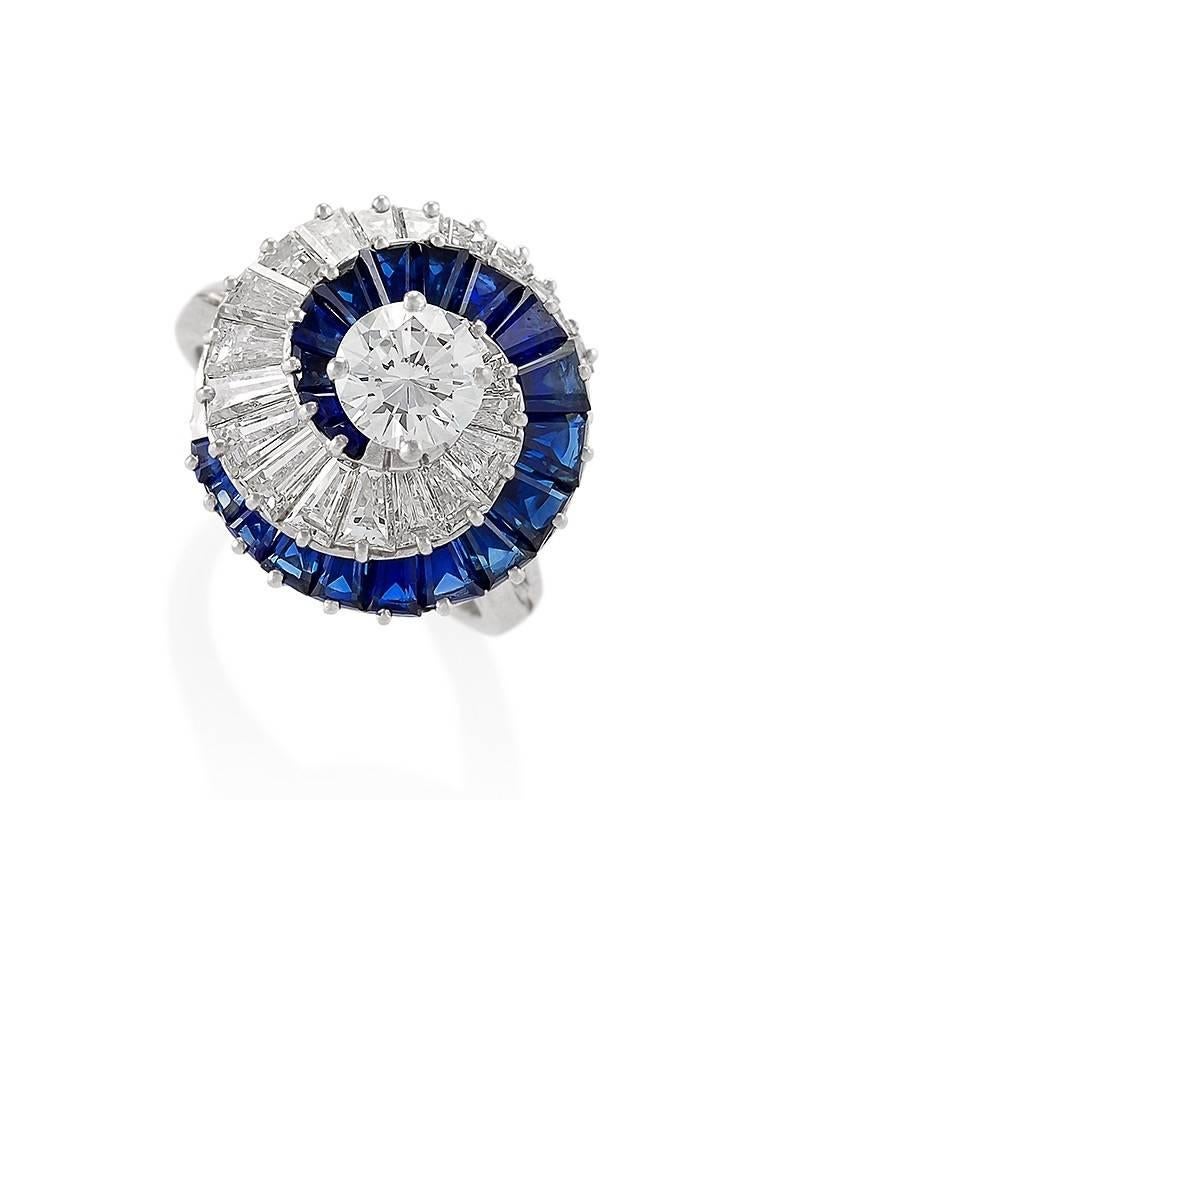 A platinum ring with sapphires and diamonds by Cartier. The ring centers on a .90 carat round cut diamond, G/H color, VS clarity with 20 baguette-cut diamonds weighing a total of approximately 2.25 carats, G/H color, VS clarity. and 20 baguette